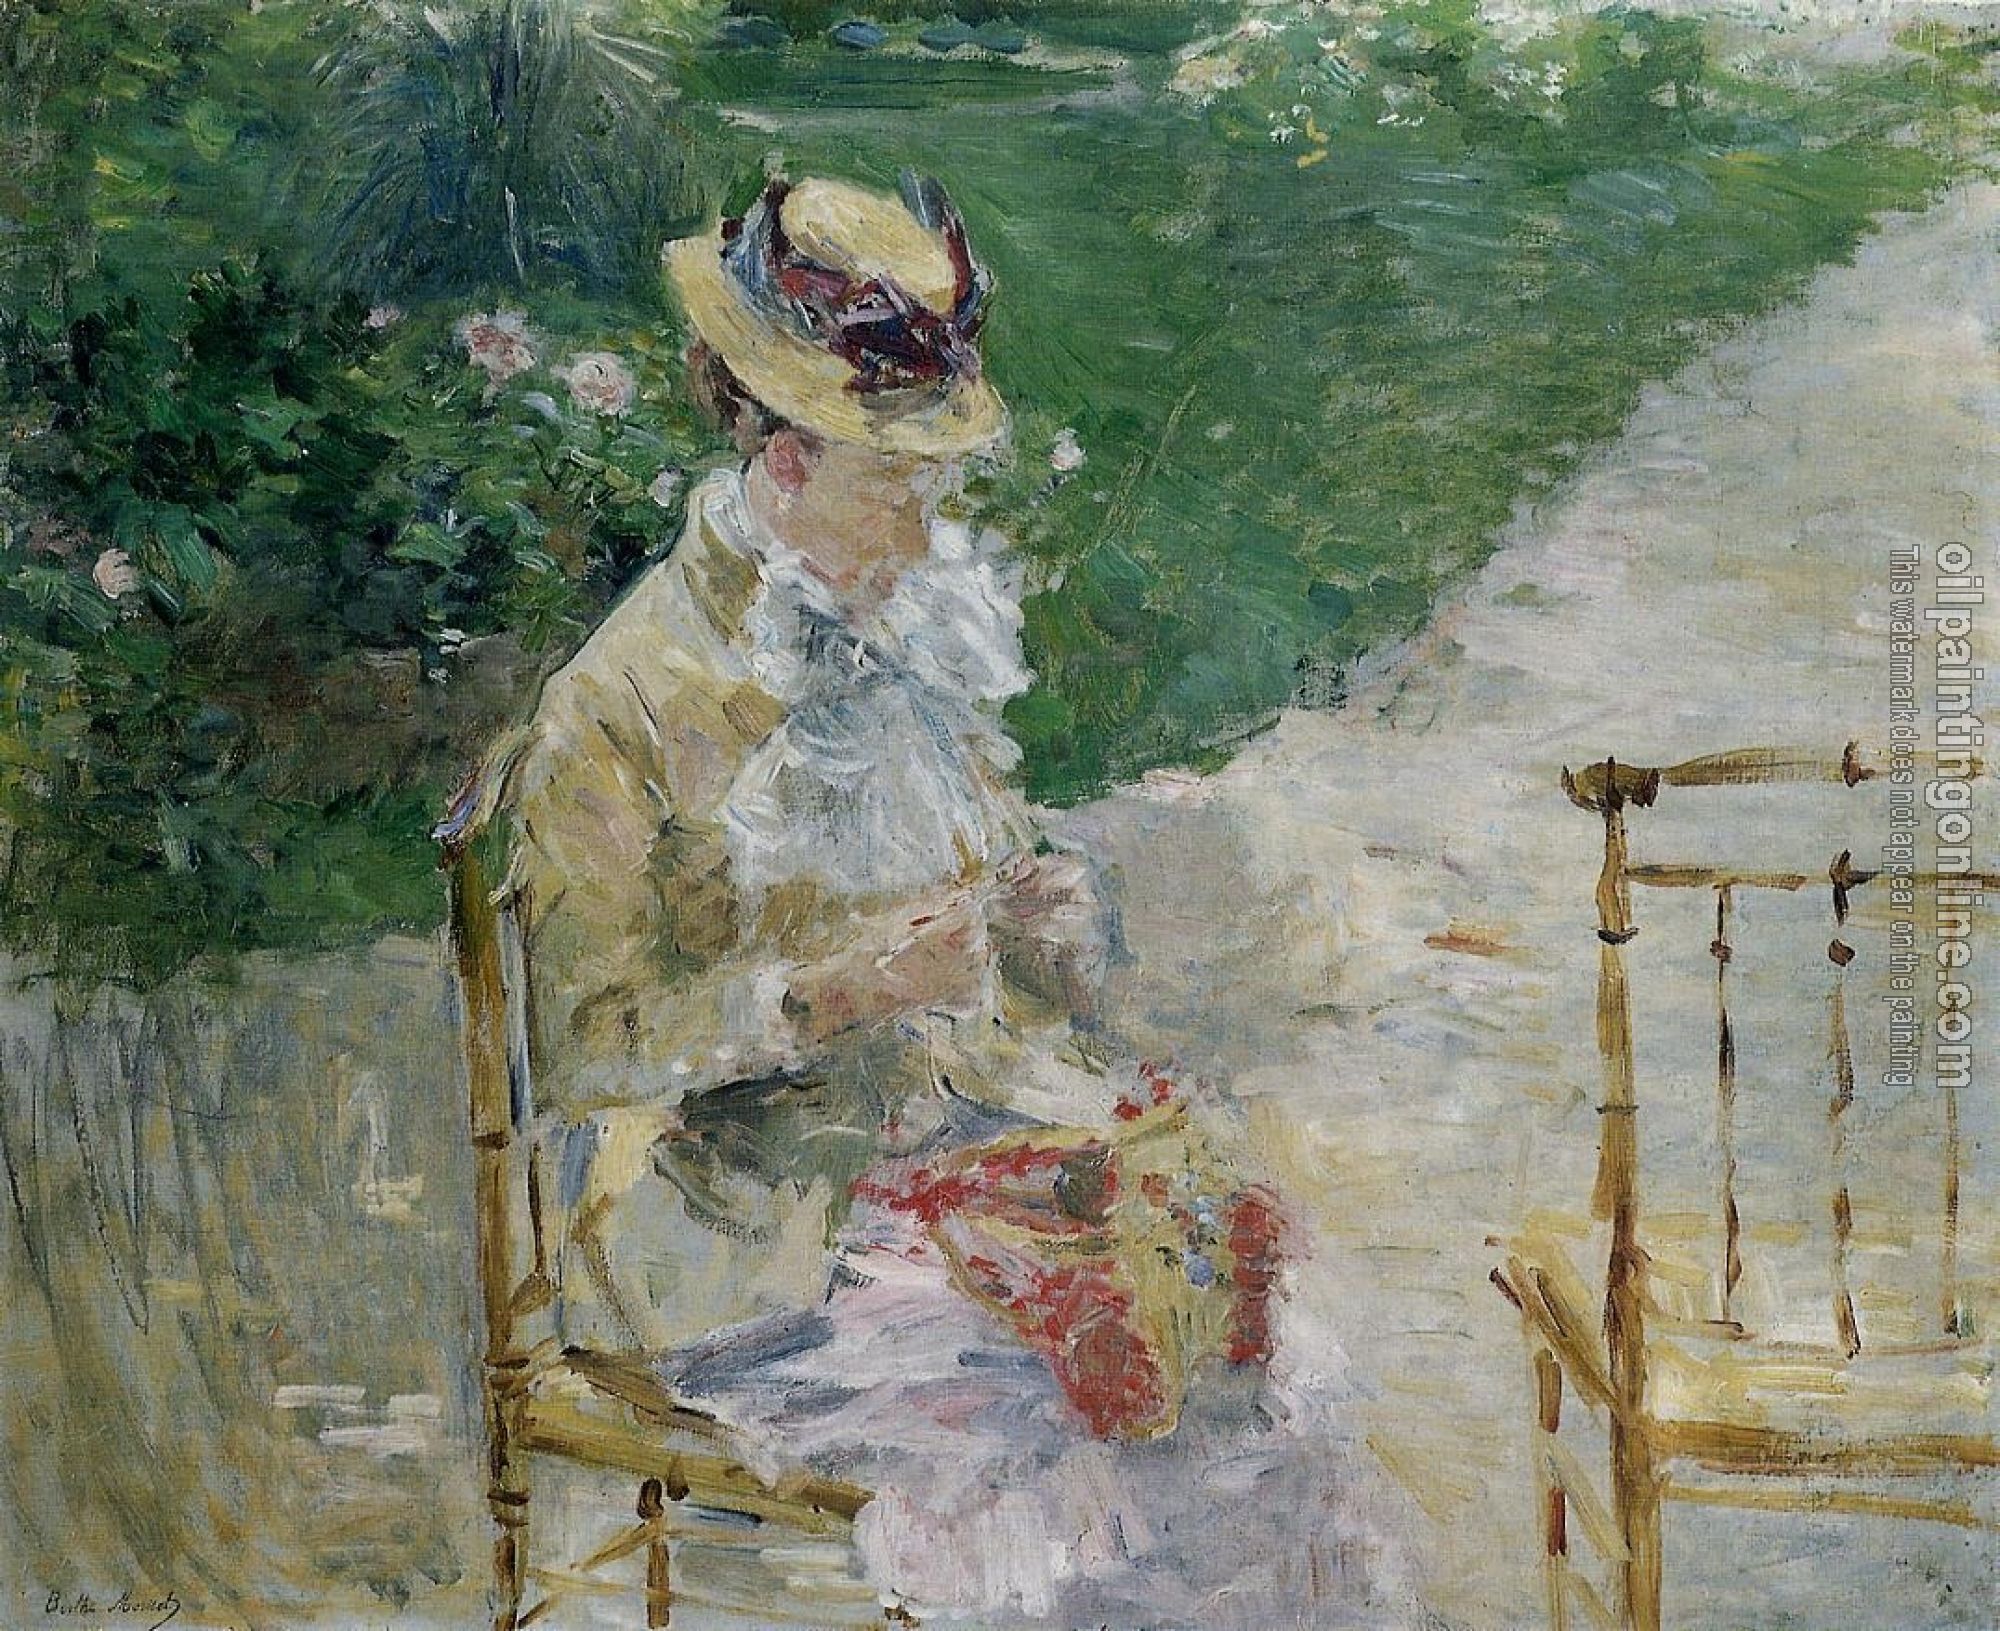 Morisot, Berthe - Young Woman Sewing in the Garden